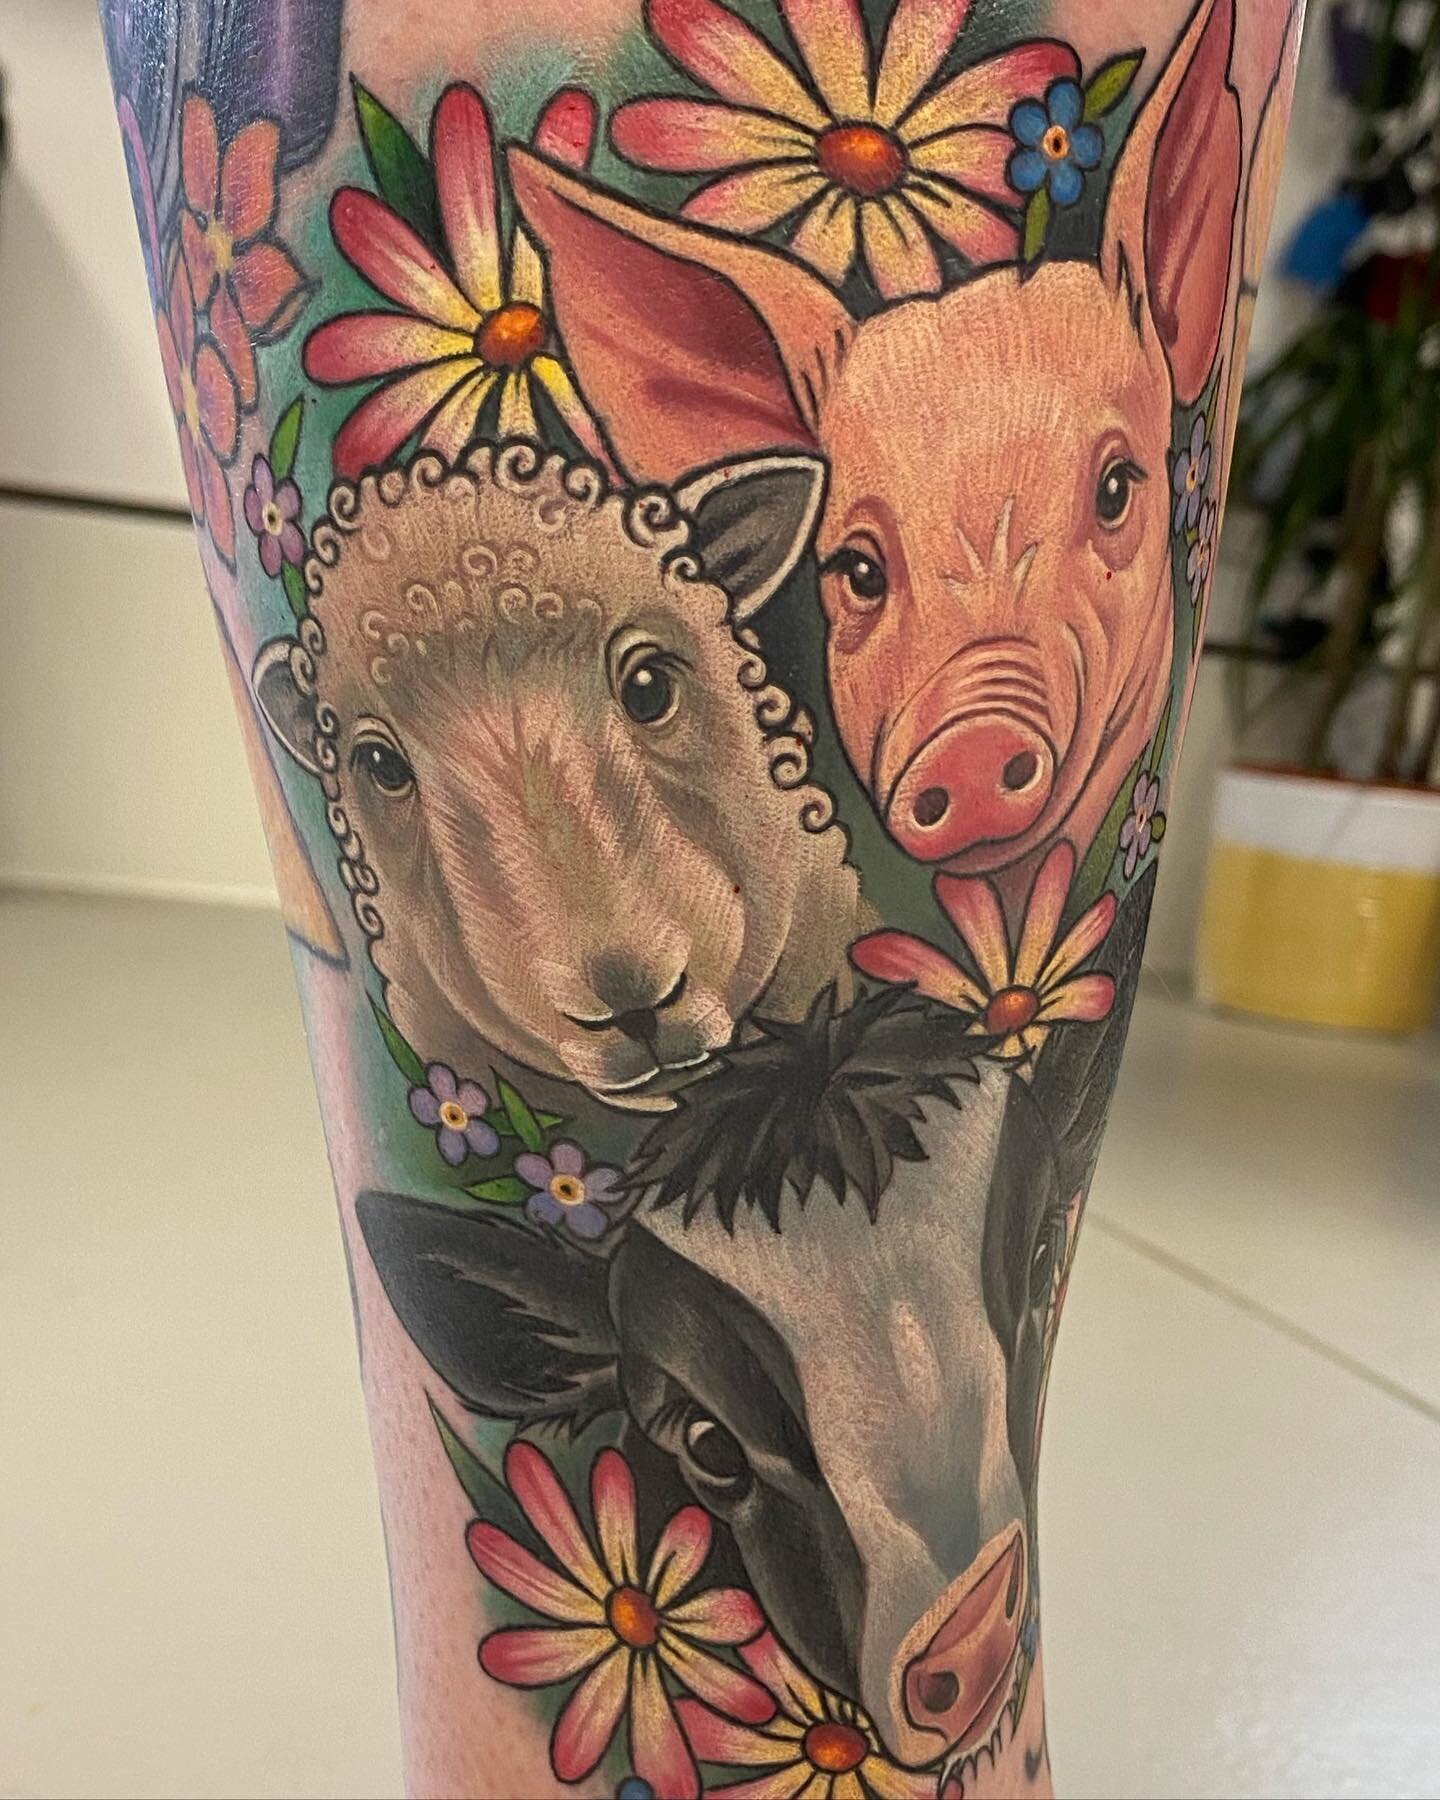 Thanks Tiffany 😊 🐖🐄🐑
Apparently we did this in 2022&hellip;

Made with the best @fusion_ink 
Supplies from @killerinktattoo
Made in Edinburgh 🏴󠁧󠁢󠁳󠁣󠁴󠁿 
(I also really like @kwadron cartridges)

Now booking May and June 2024 💫

@michellemad